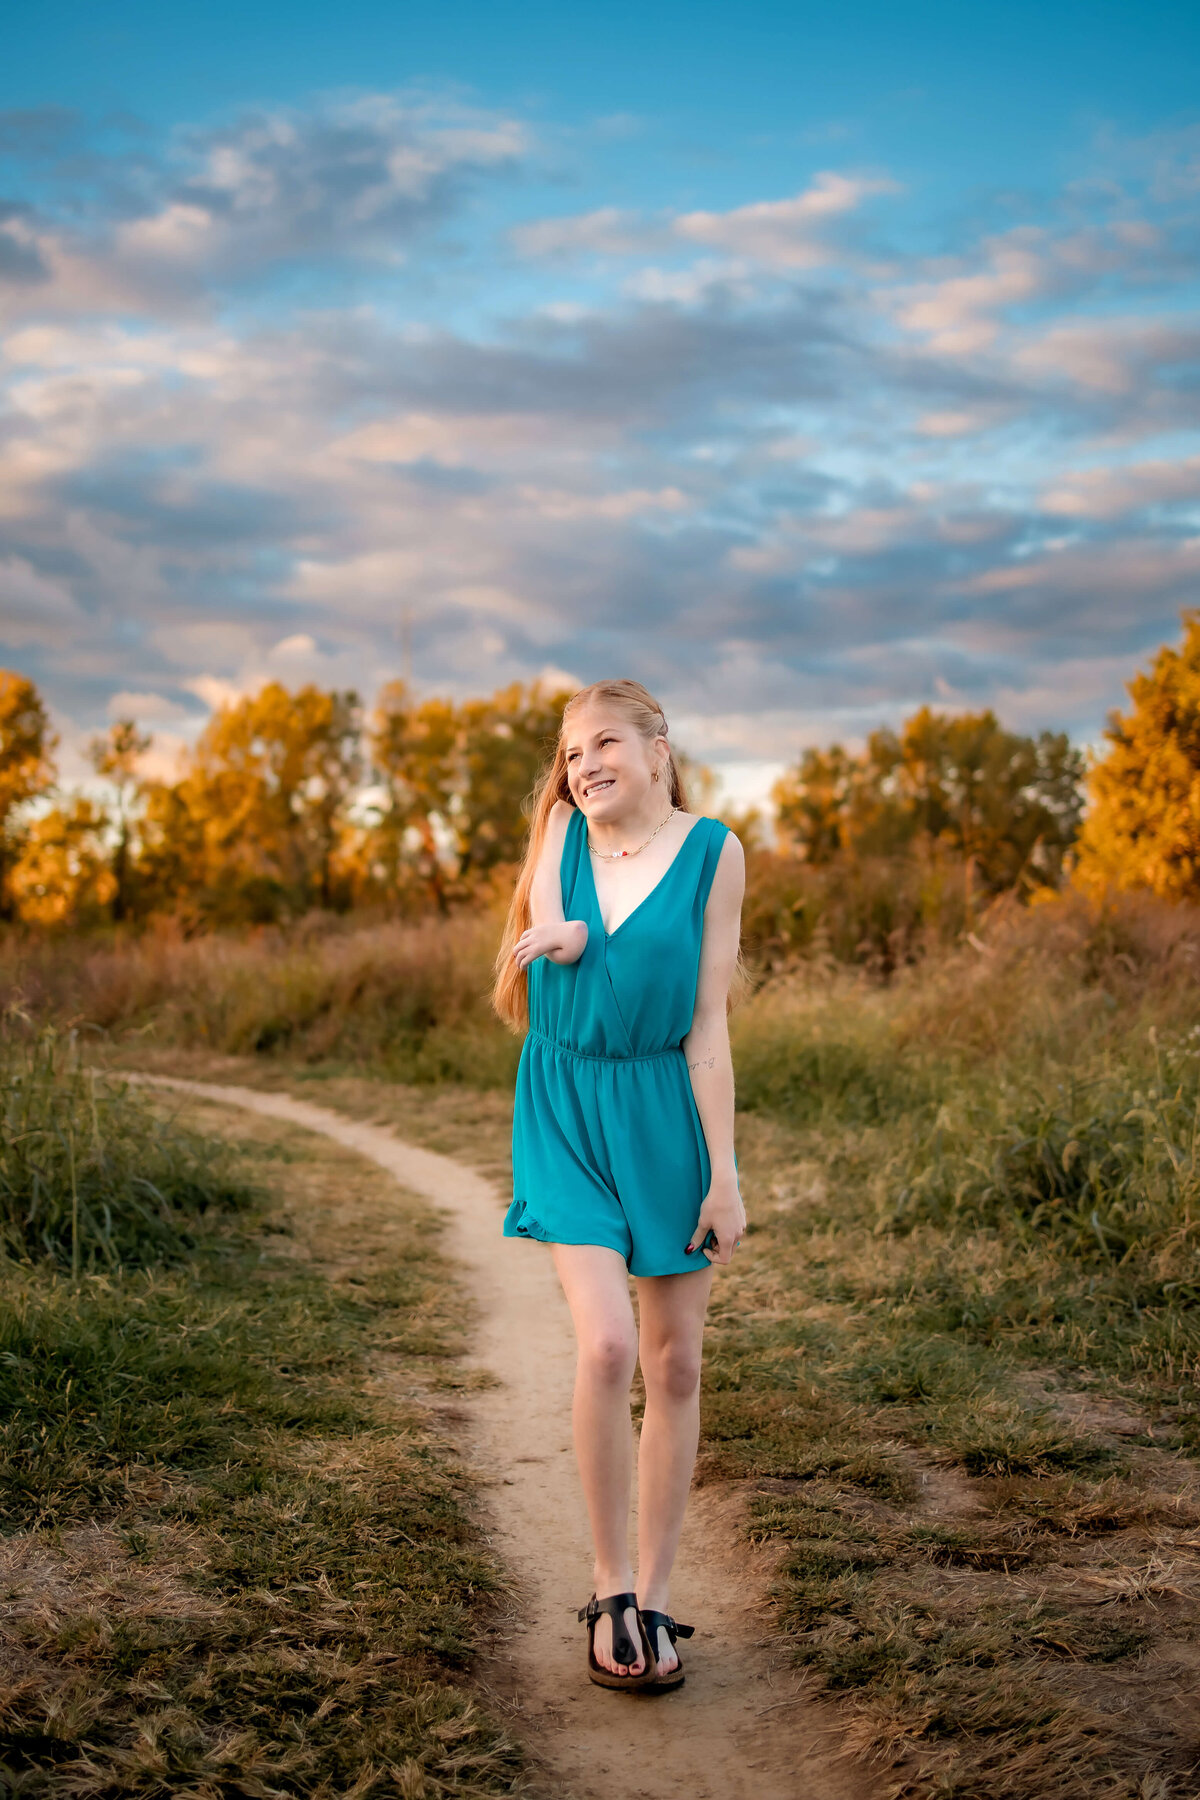 A gorgeous young lady is walking on a dirt path in a park on a fall day with a beautiful and colorful sky filled with clouds for her senior portraits.